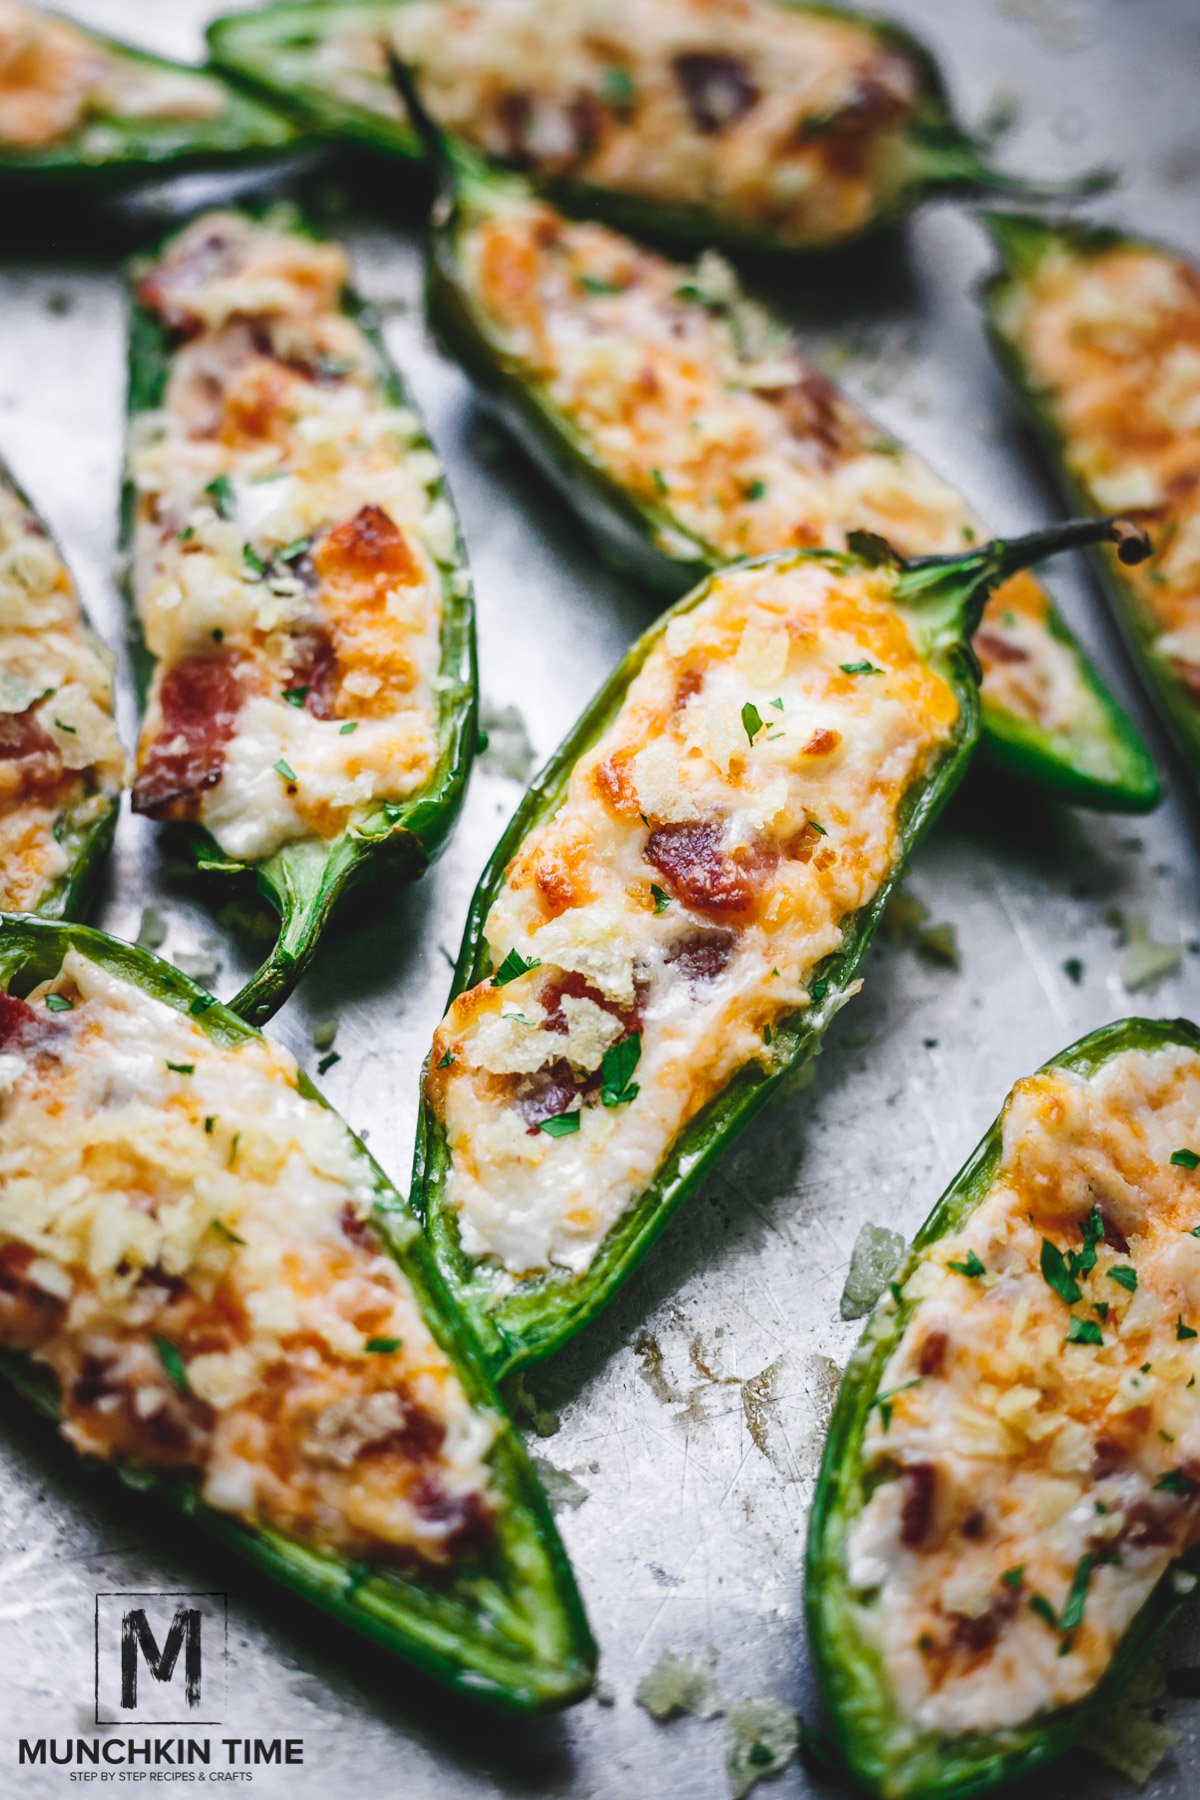 Stuffed jalapeño peppers with cream cheese, bacon & cheddar cheese.